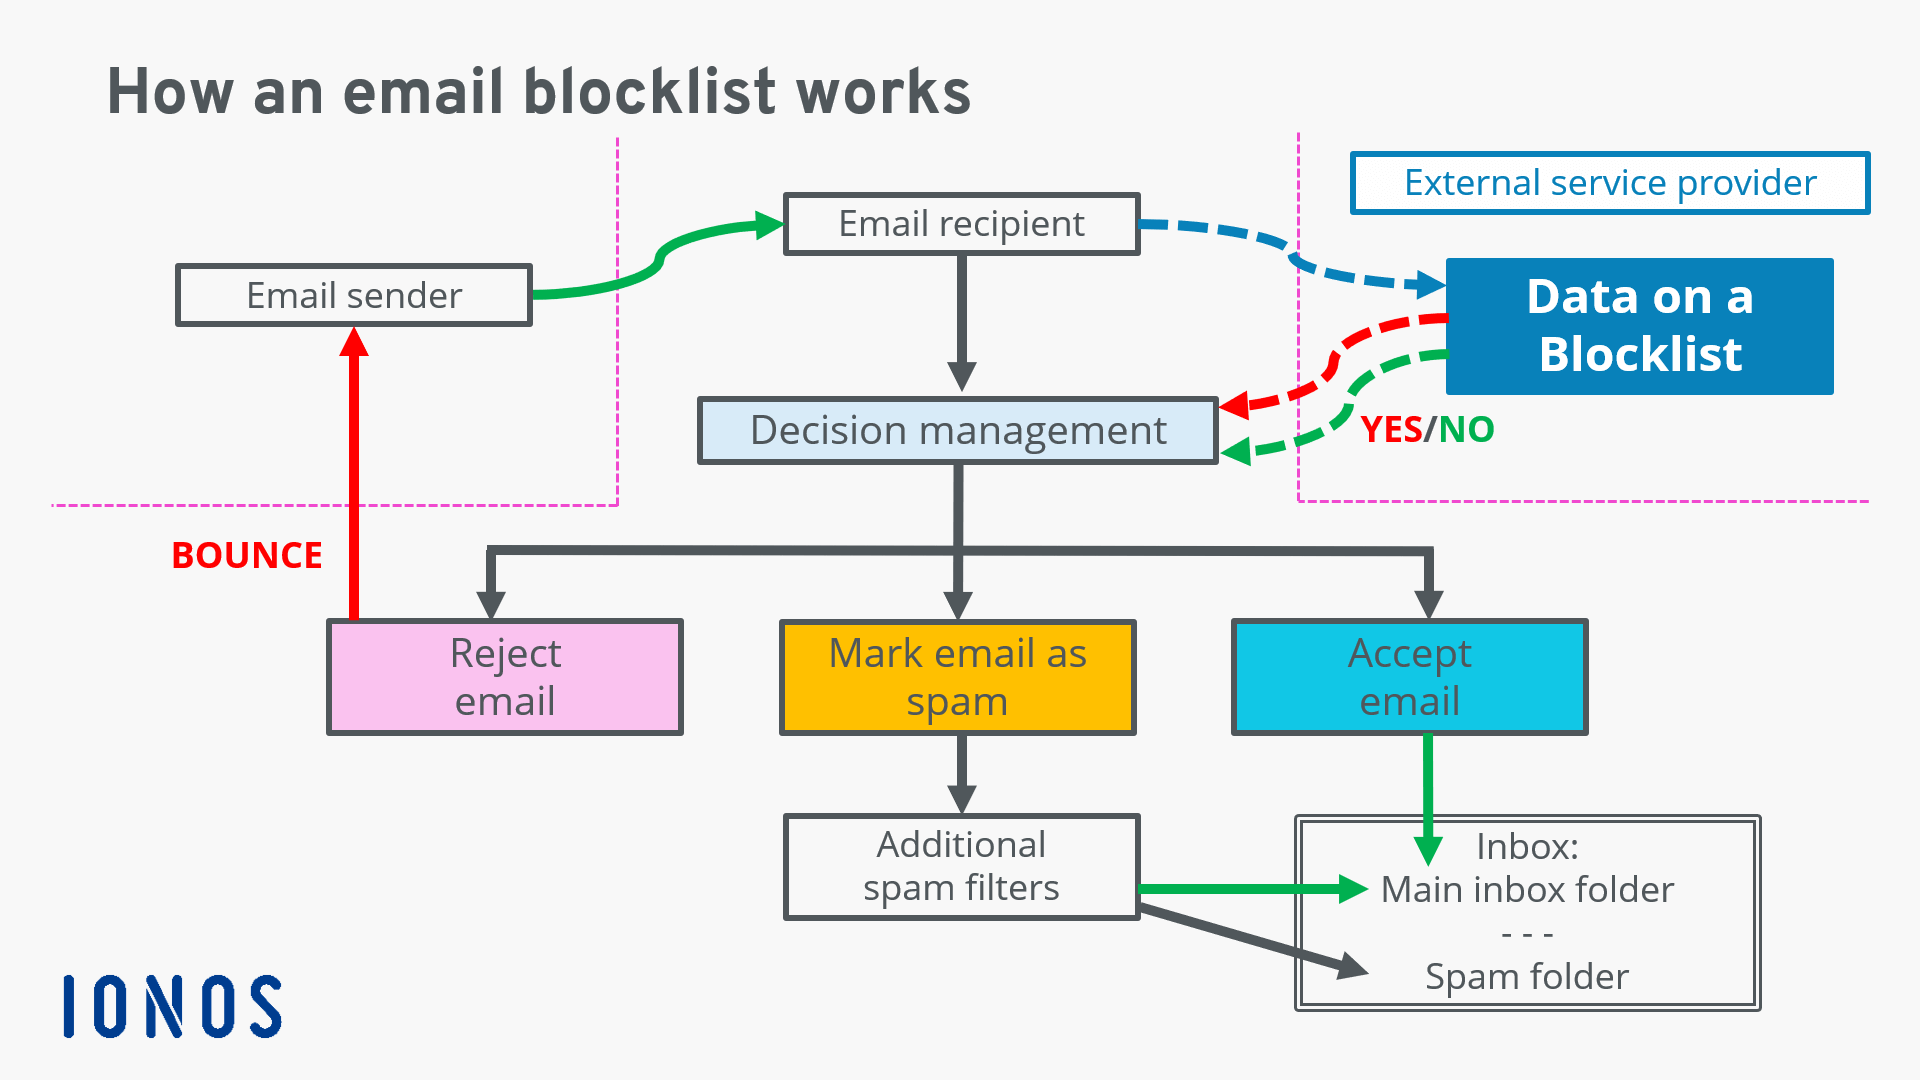 Email blocklists: The automated process